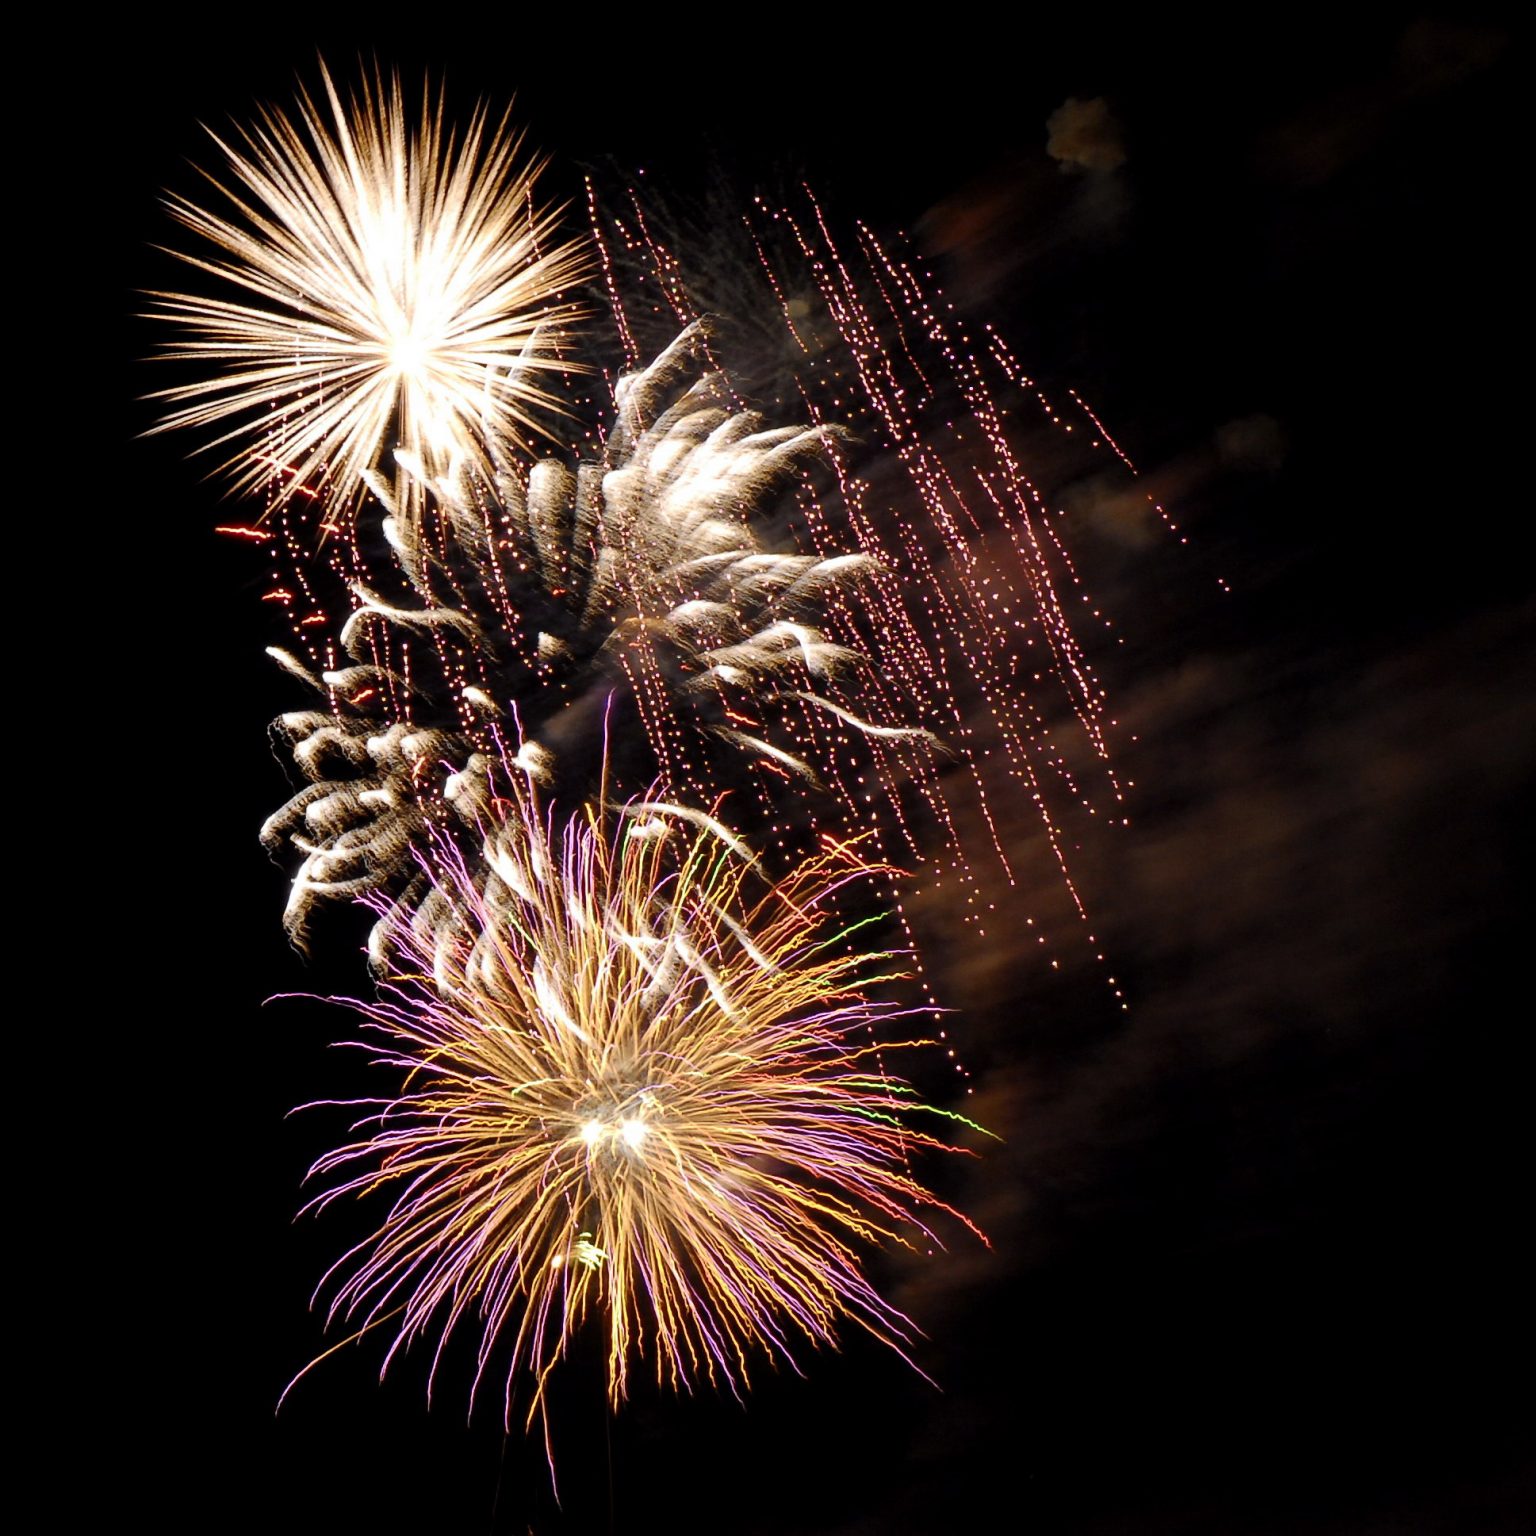 Fireworks photographed by Norm Rosen.